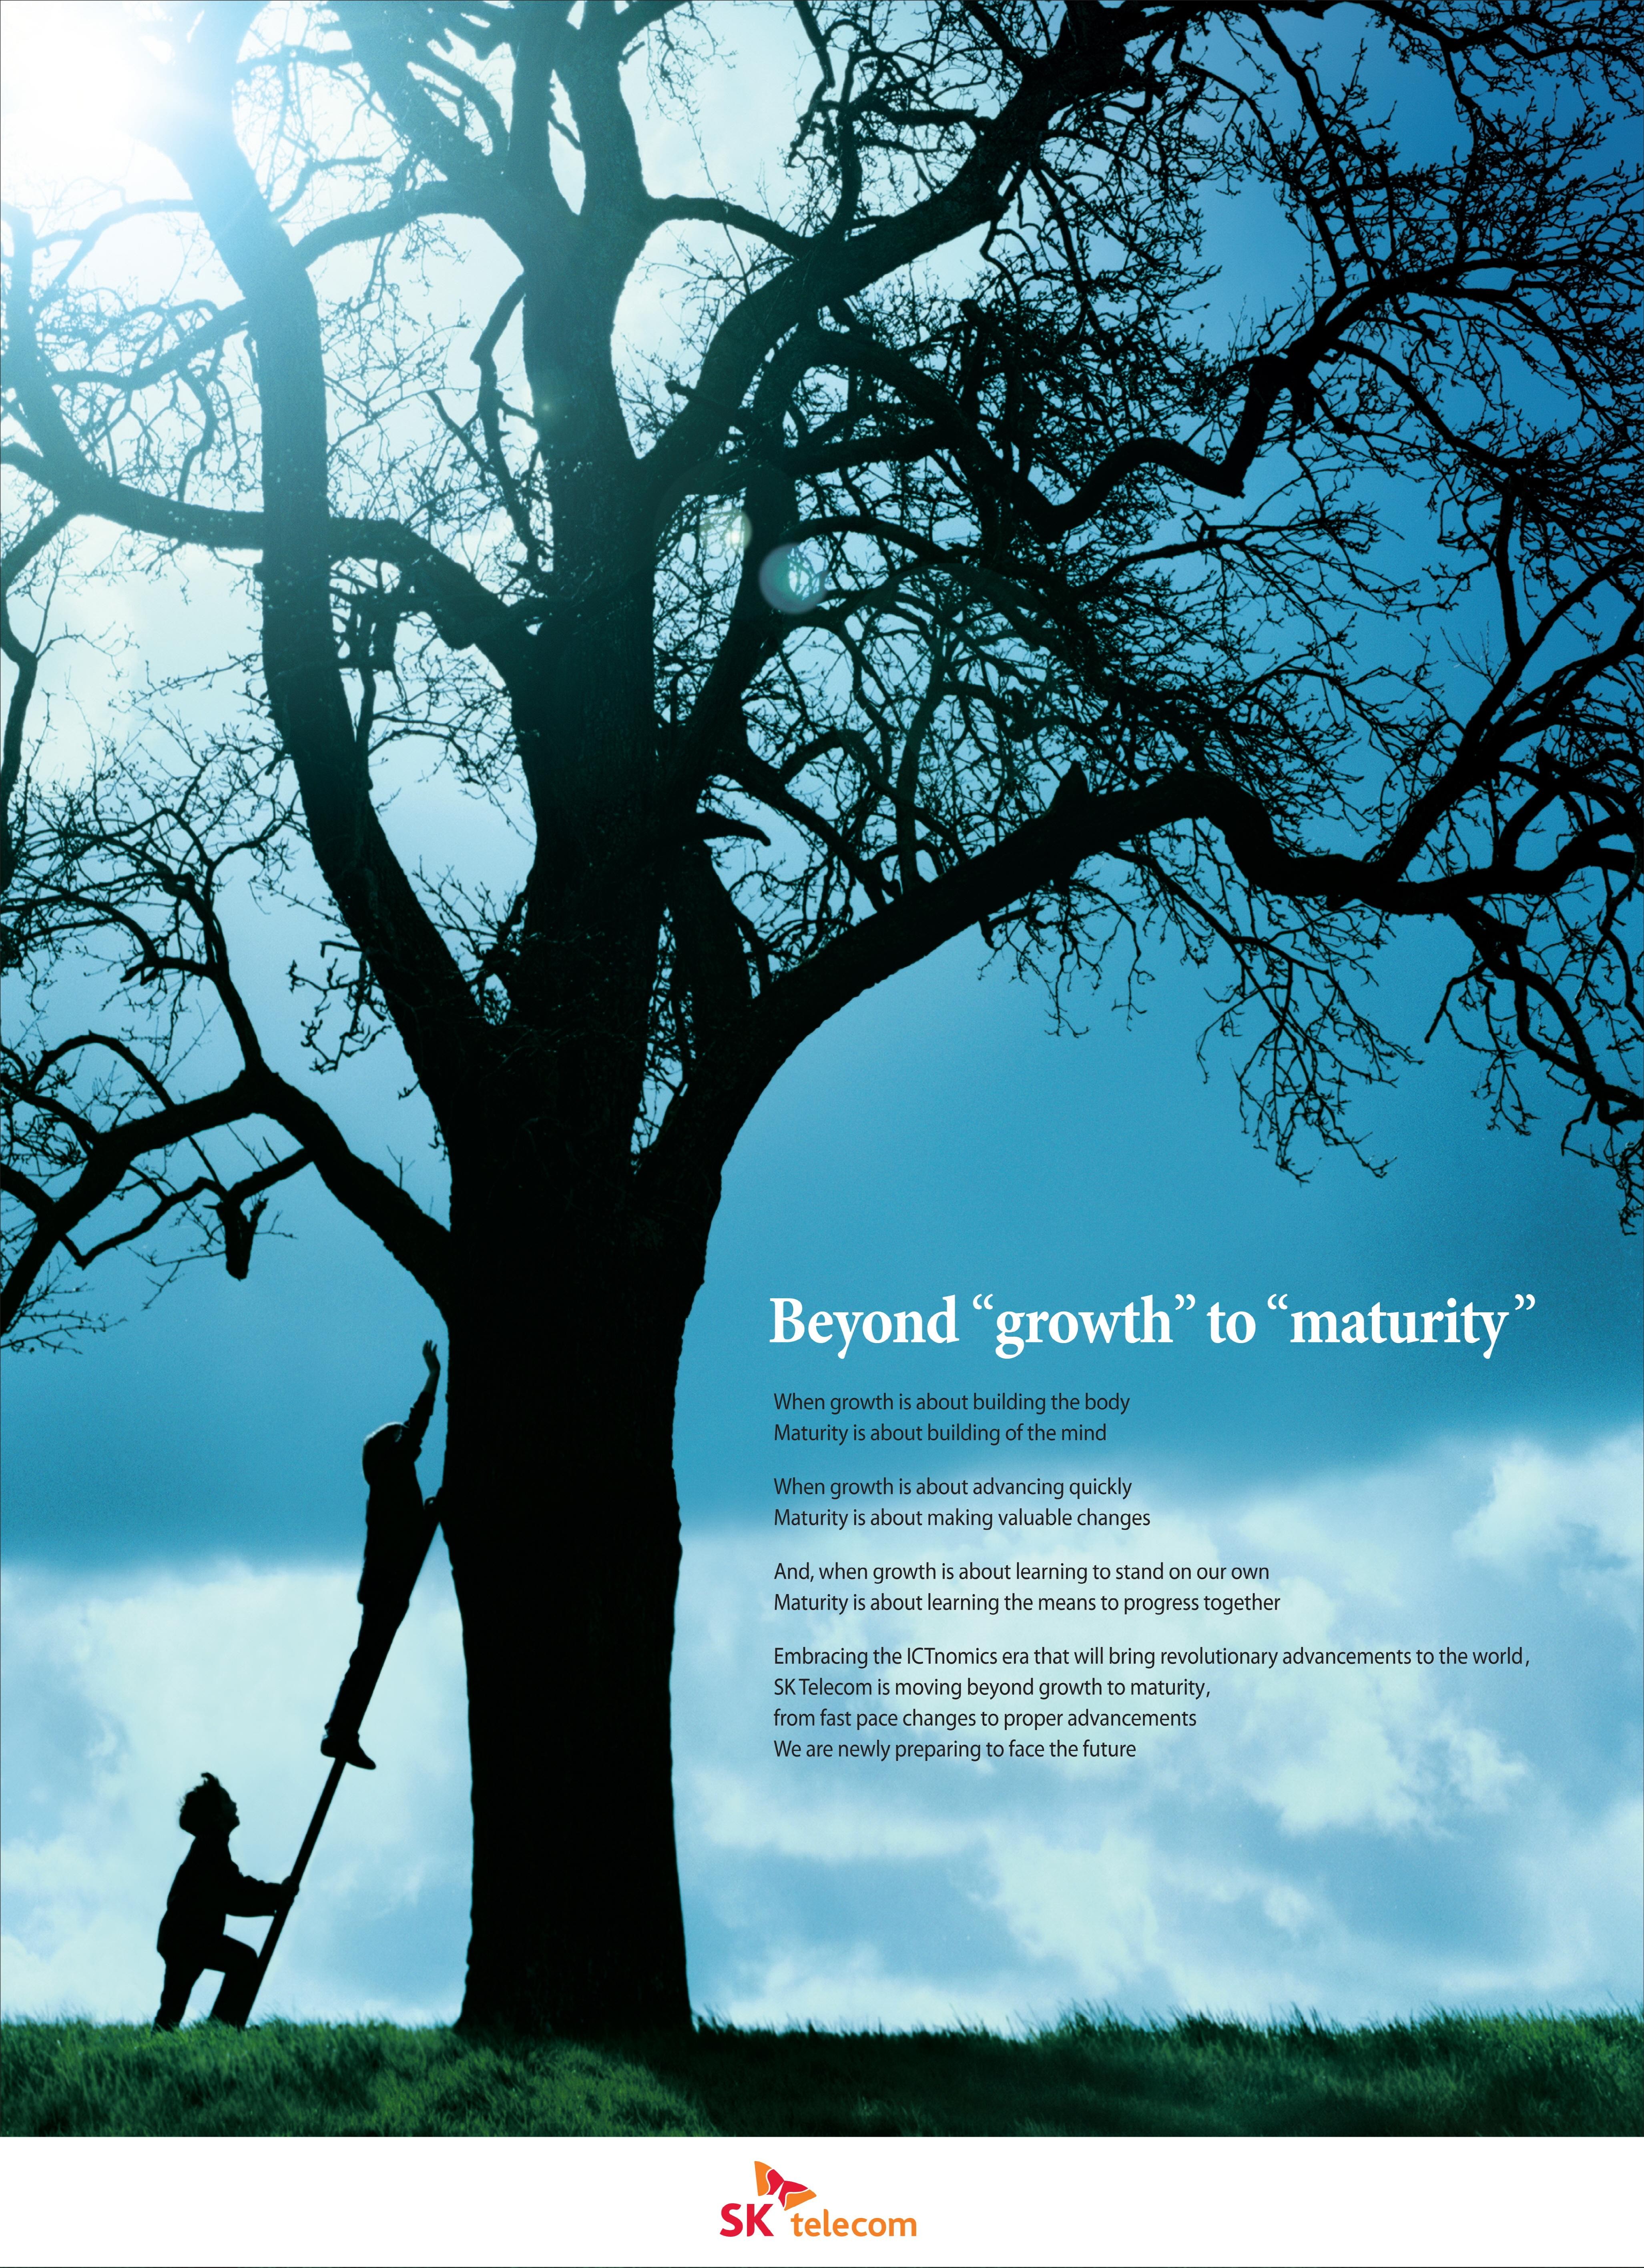 BEYOND “GROWTH” TO “MATURITY”